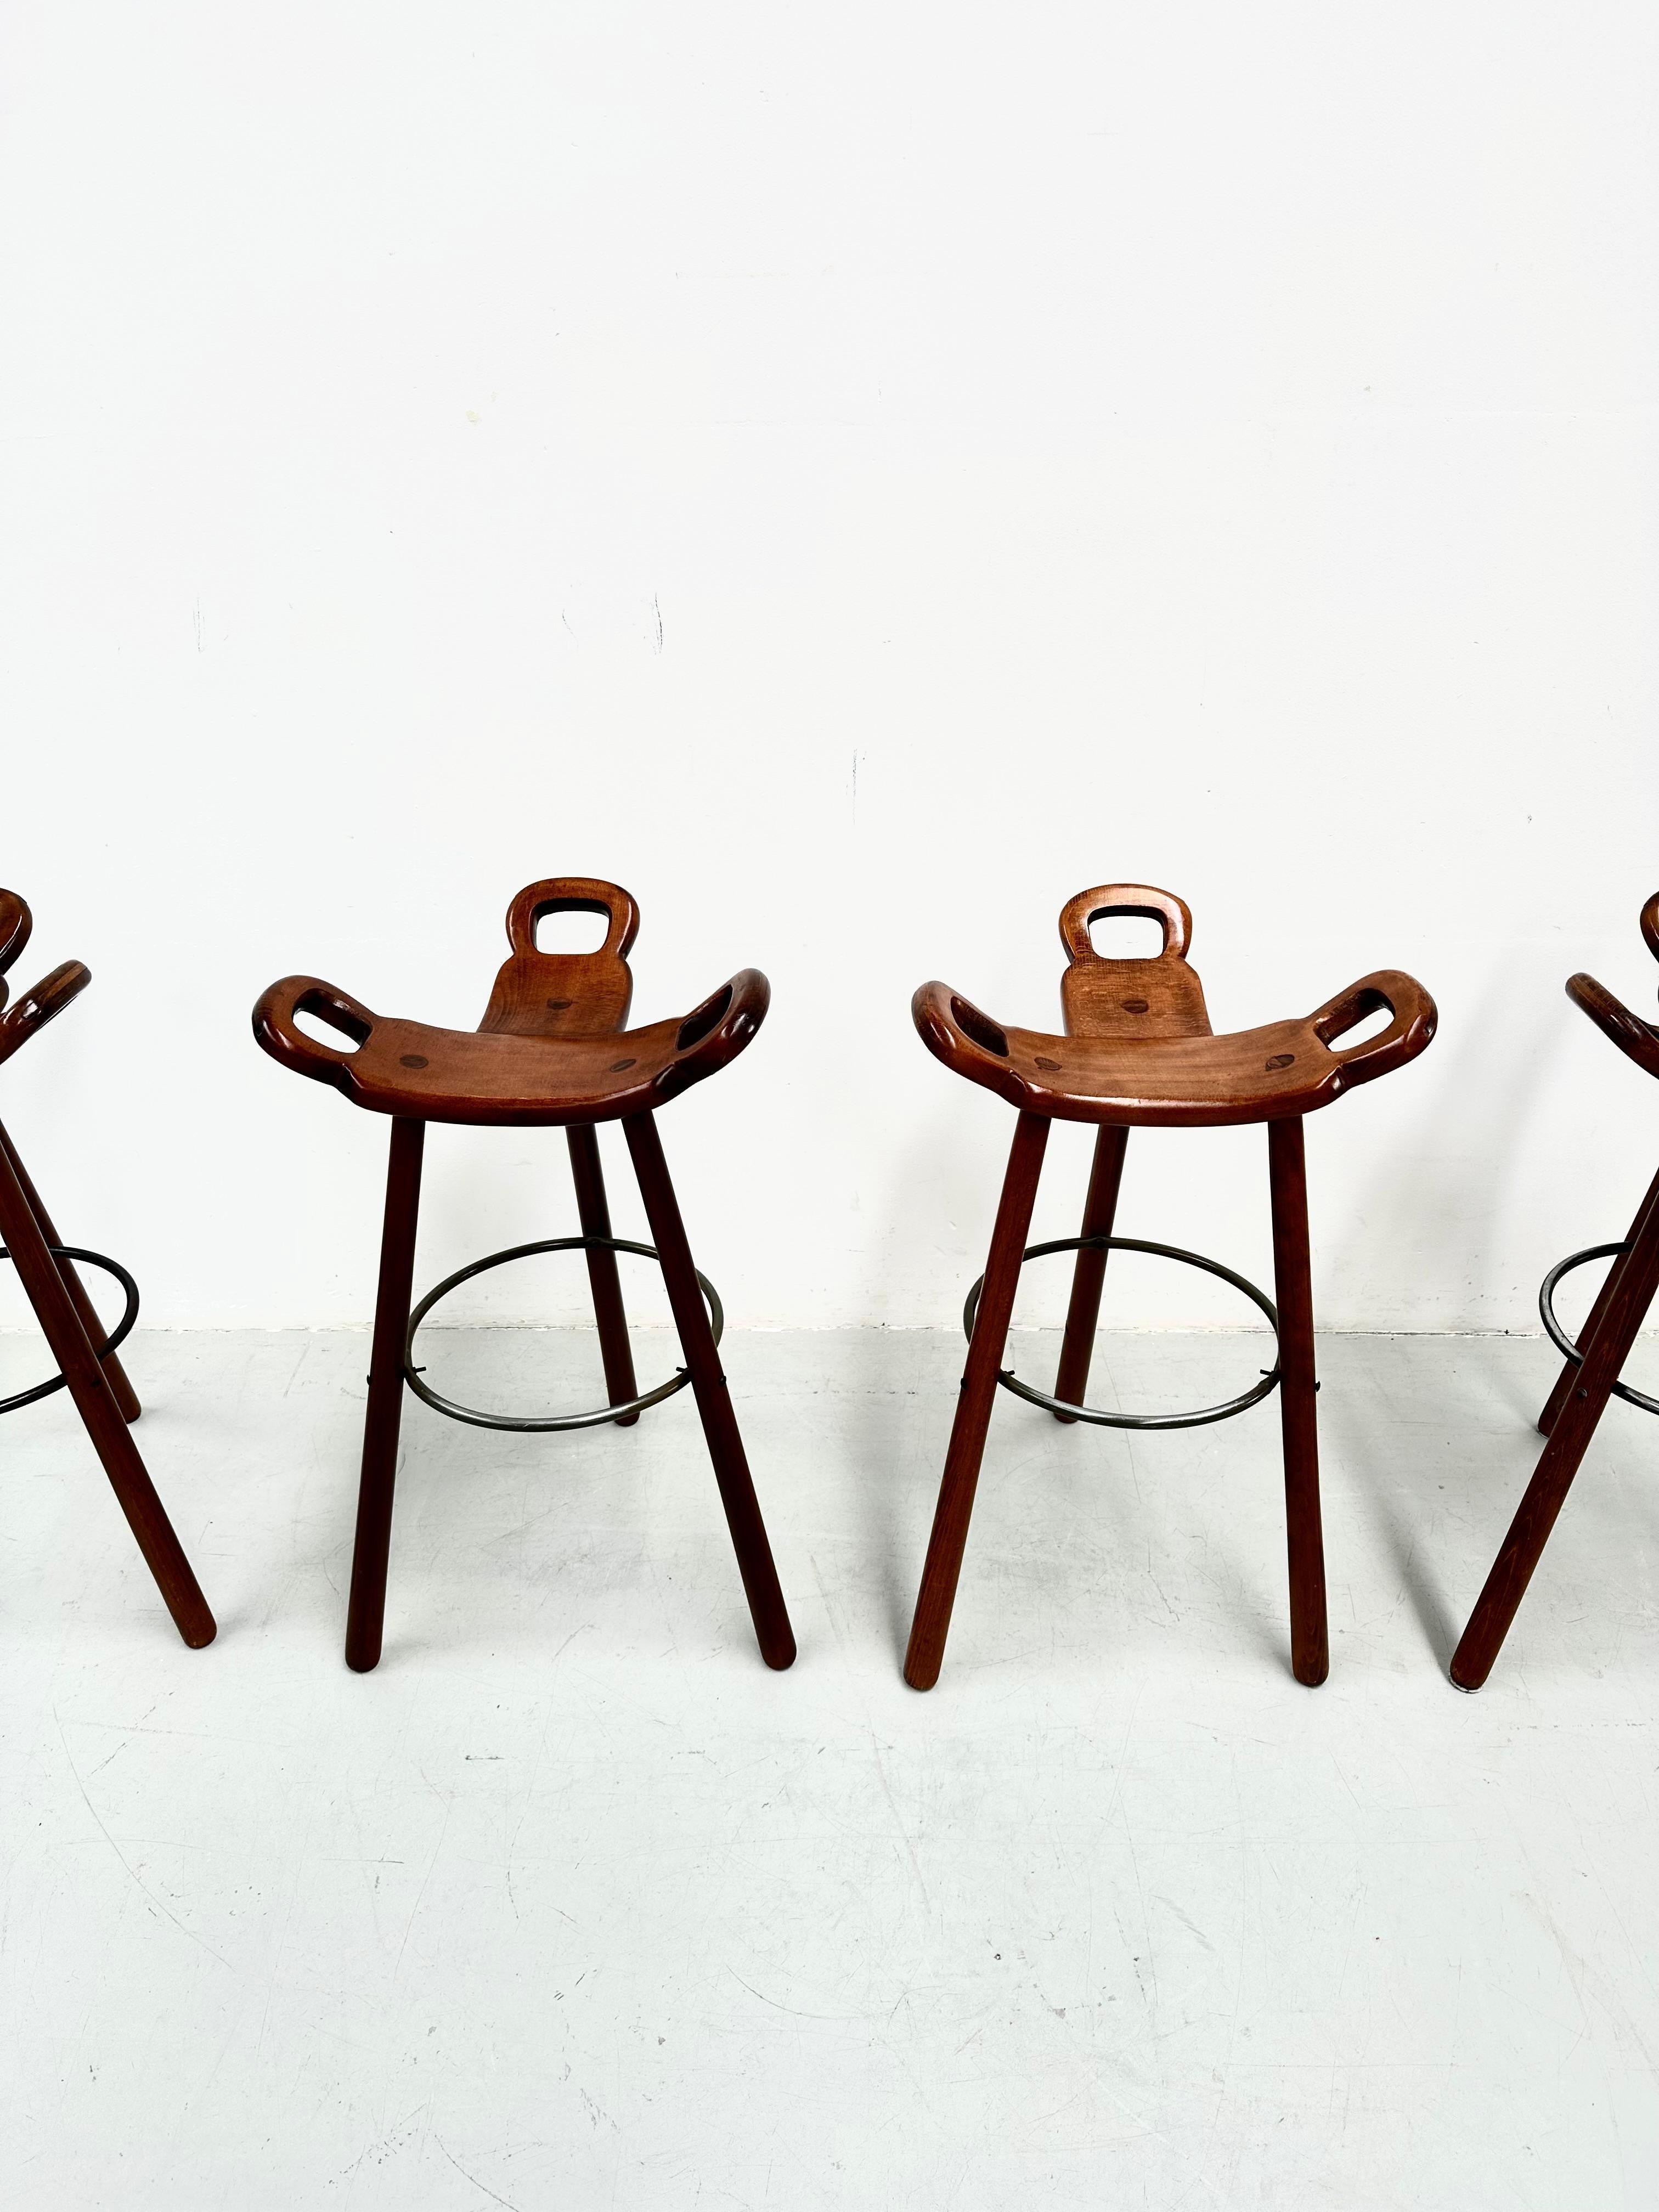 These set of 4 vintage beech  bar stools were designed by Sergio Rodrigues for Confonorm in the seventies. Great solid design in Brutalist style manufactured in Spain.